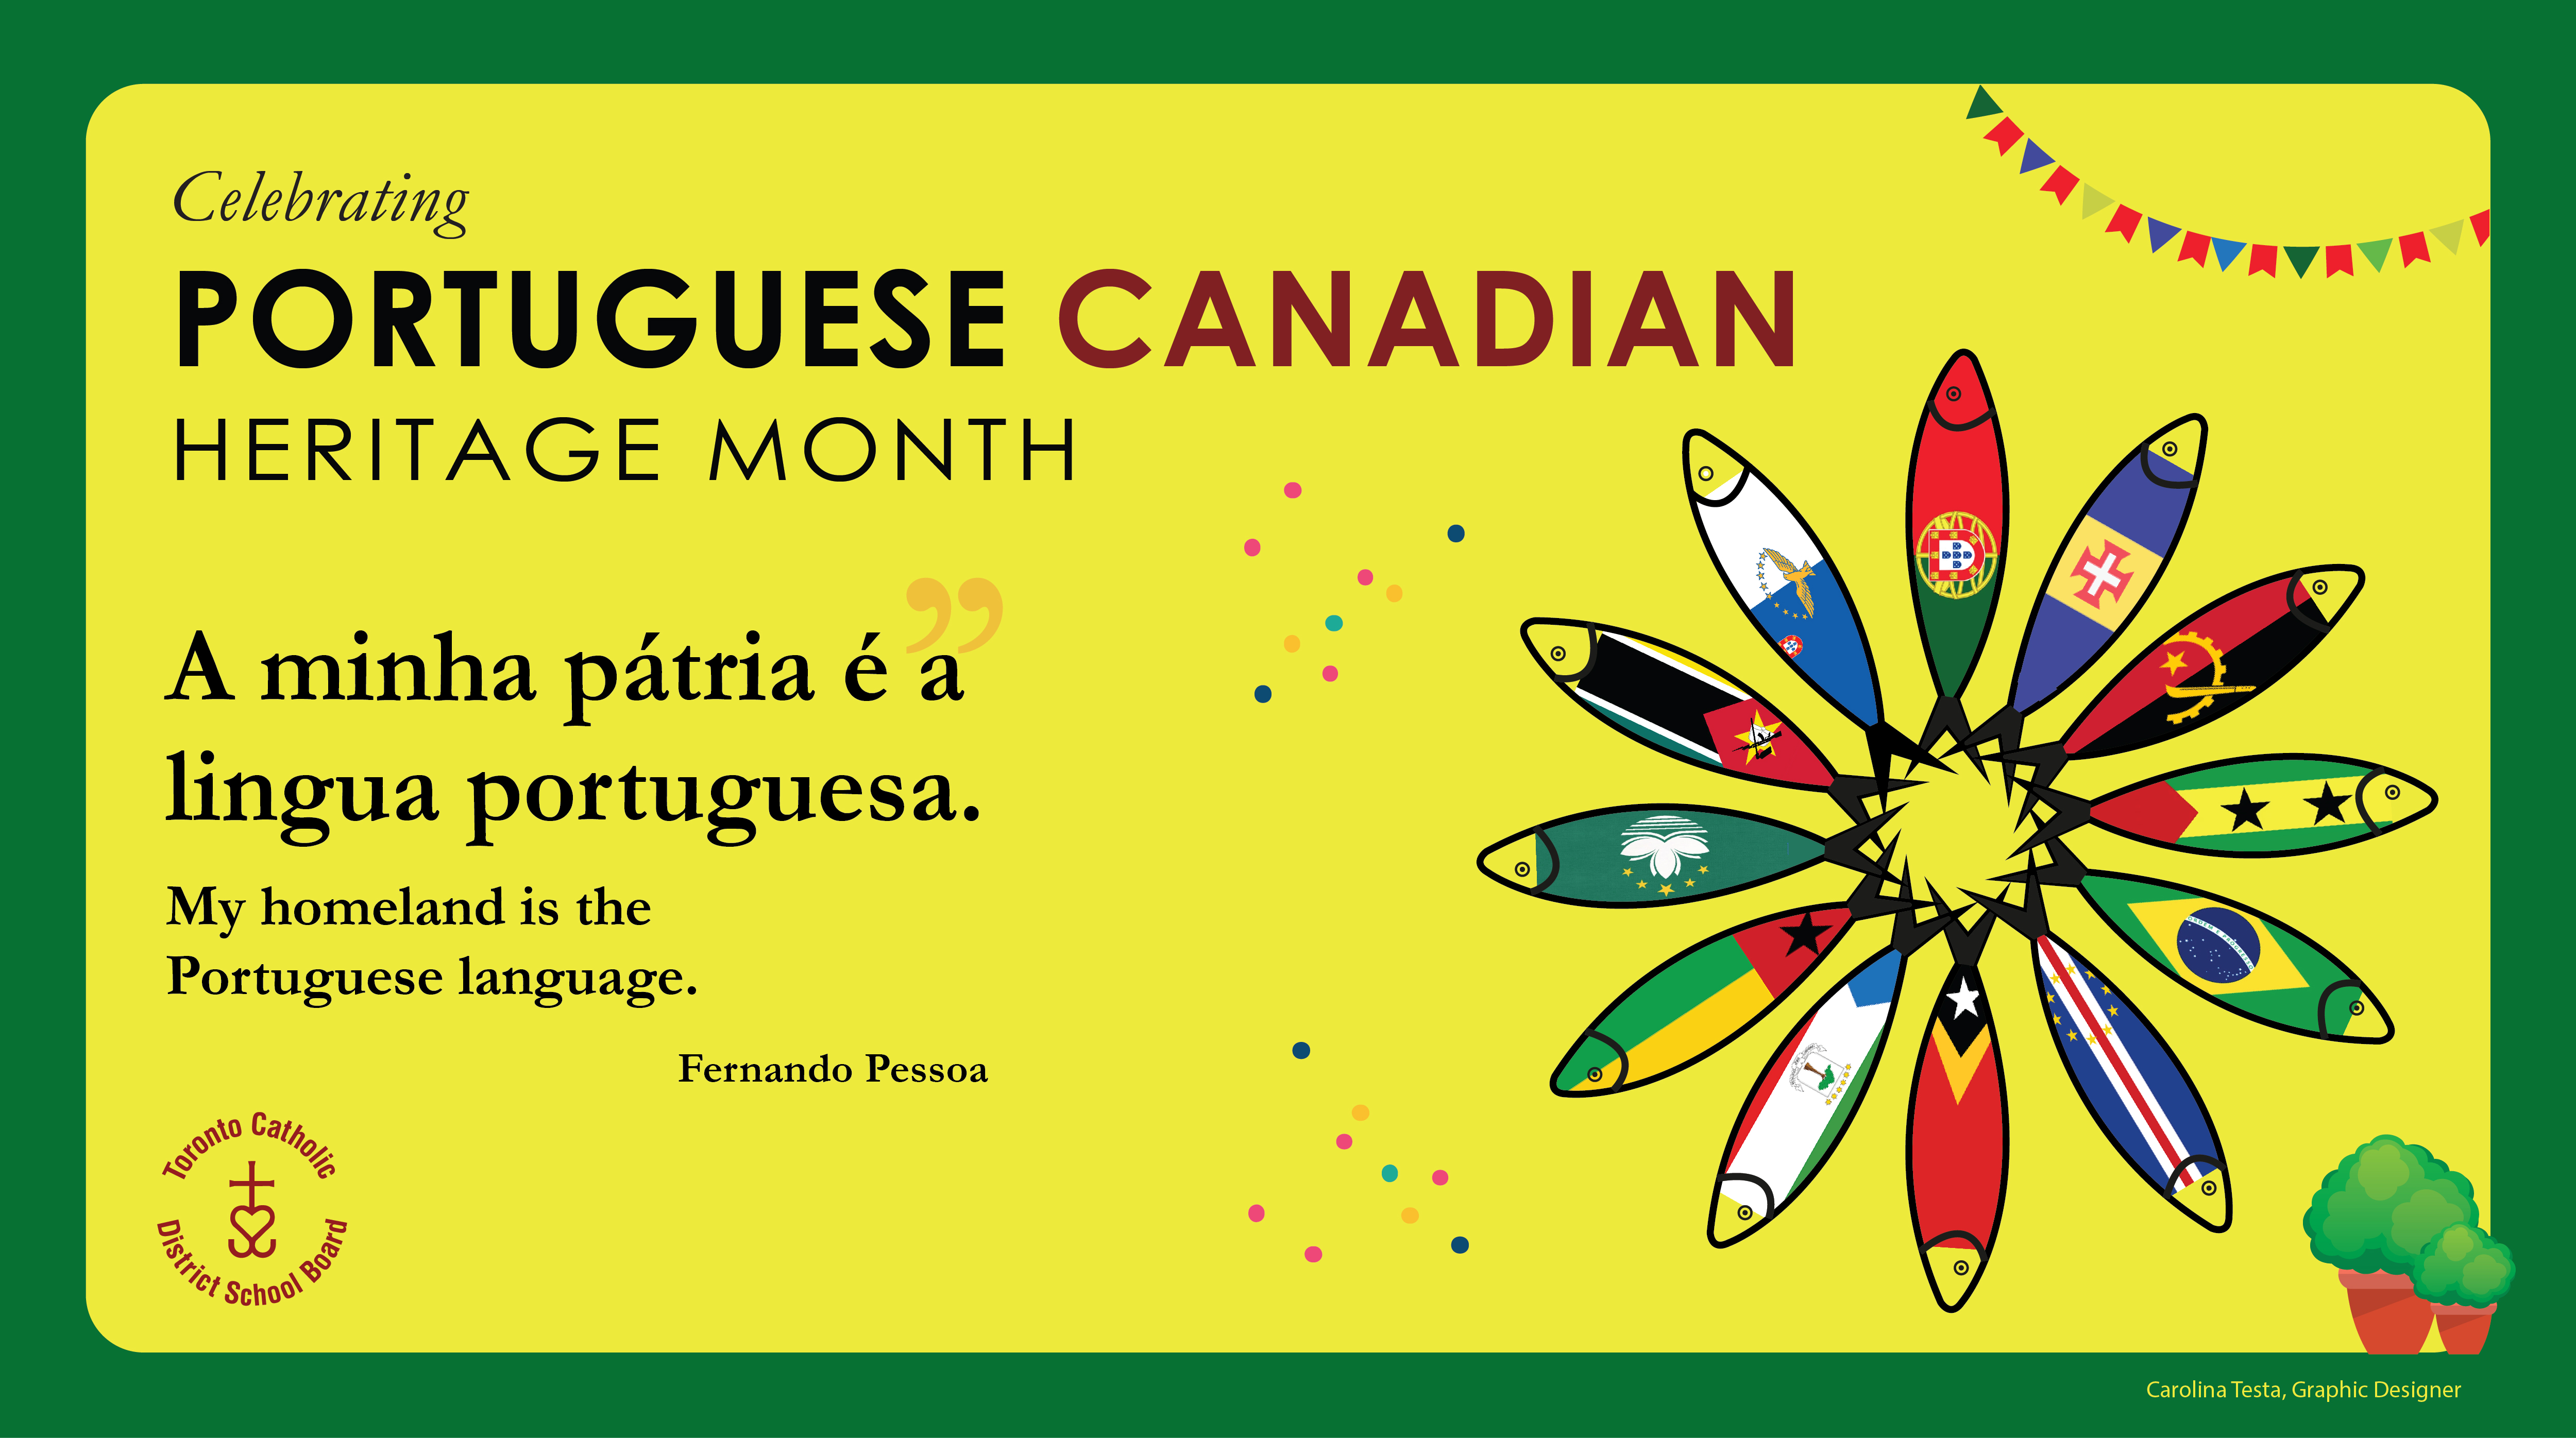 Banner for Portuguese Canadian Heritage Month - The top left says Celebrating Portuguese Canadian Heritage Month on a background of yellow and green. Below is the quote "A minha pátria é a língua portuguesa" - "My homeland is the Portuguese language." by Fernando Pessoa. Below is the circular TCDSB logo. On the right side of the banner is a graphic of twelve vector fish arranged radially in a circle, with each fish filled in with the flag of one of the Portuguese speaking countries. Bottom right is the credit for the banner - Carolina Tesa, Graphic Designer.